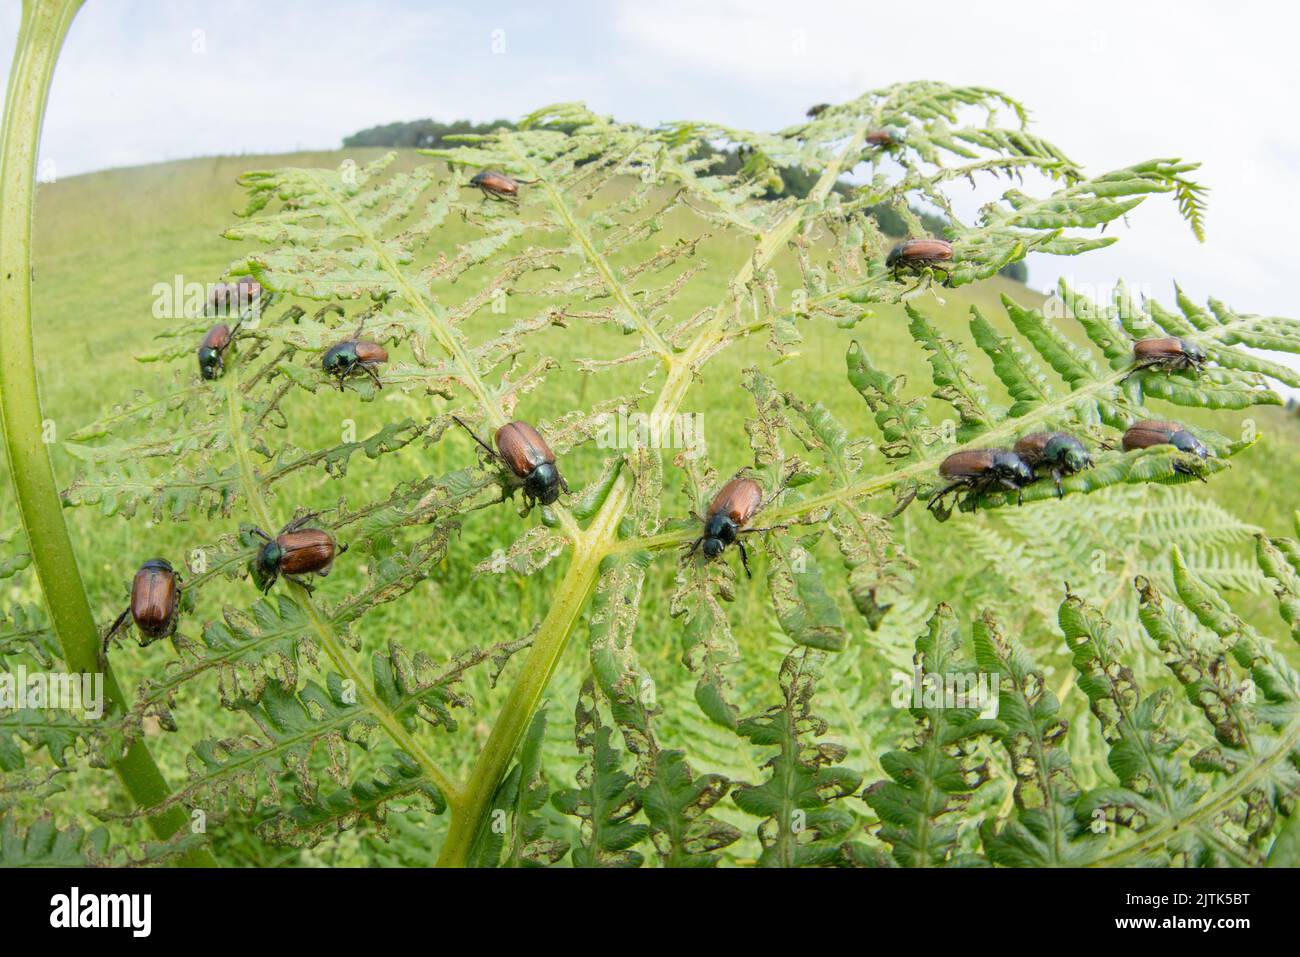 Bracken chafer beetles often occur in large numbers, as shown here in this ultra-wide macro shot of them on their host plant. Stock Photo